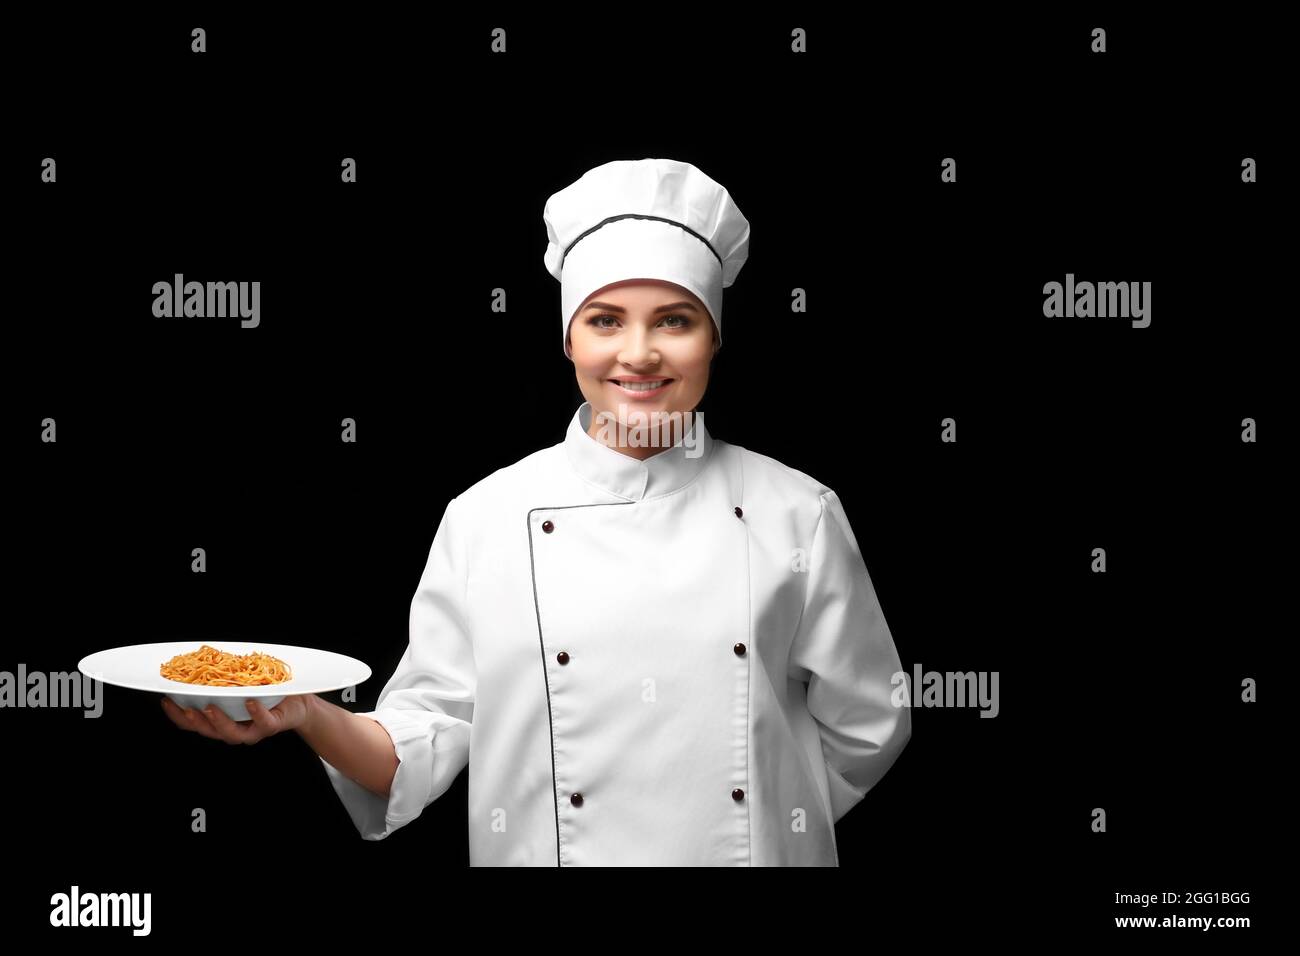 Portrait of young woman chef holding plate with pasta on black background  Stock Photo - Alamy